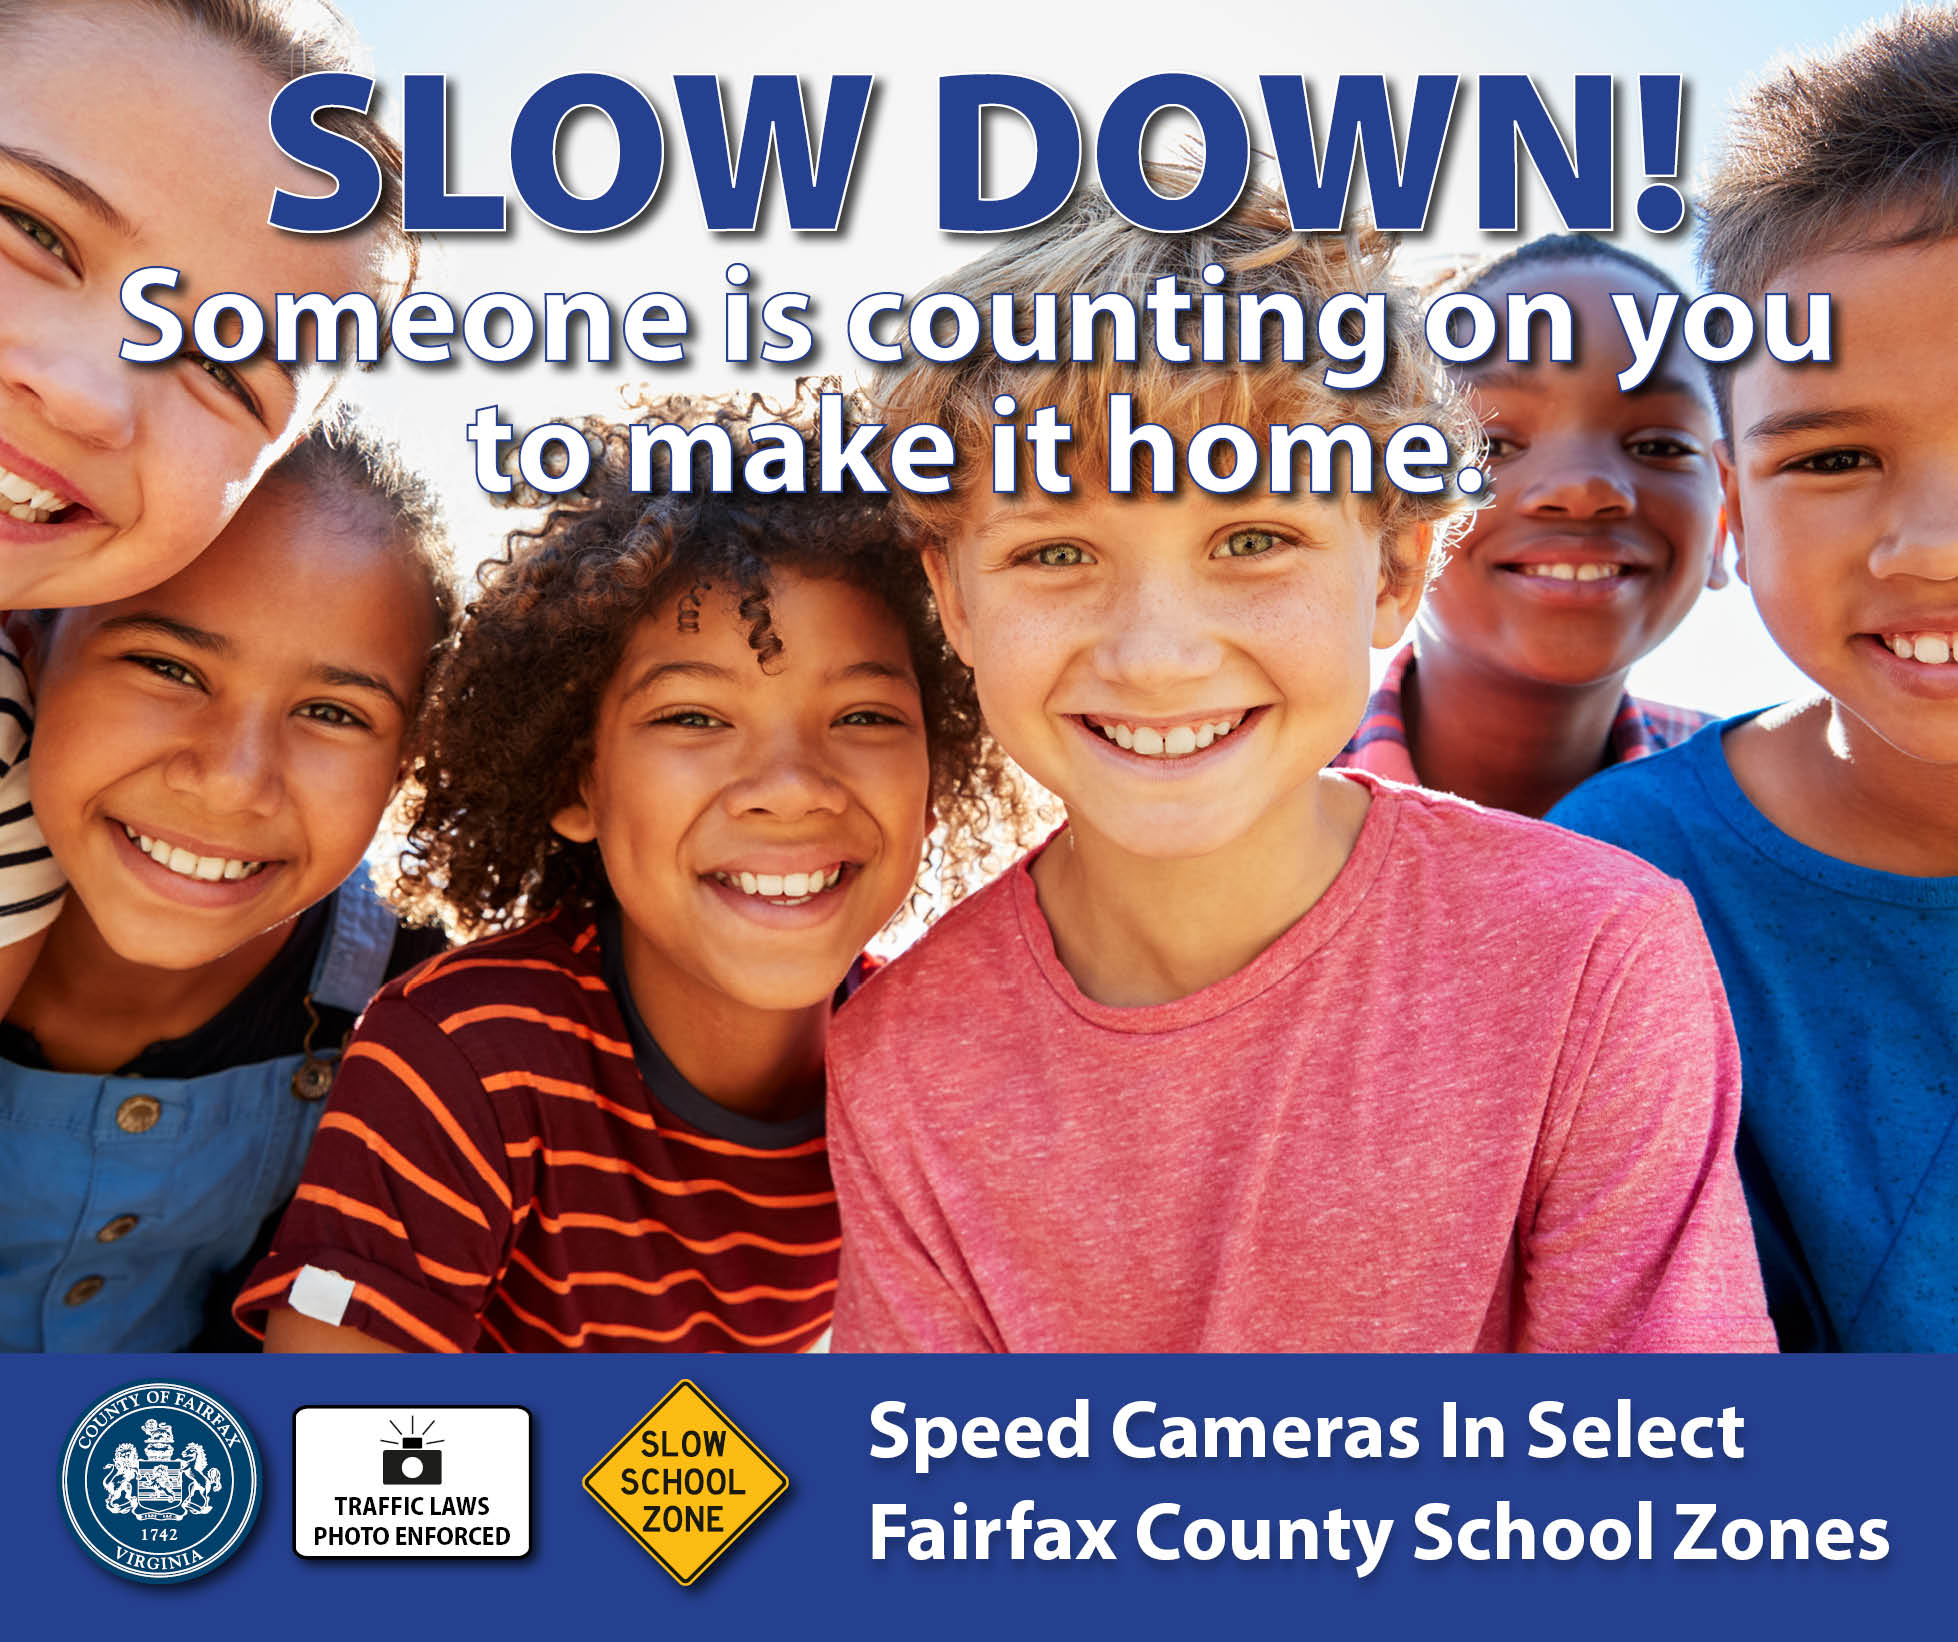 Slow Down advertisement for the Speed Camera Pilot Program